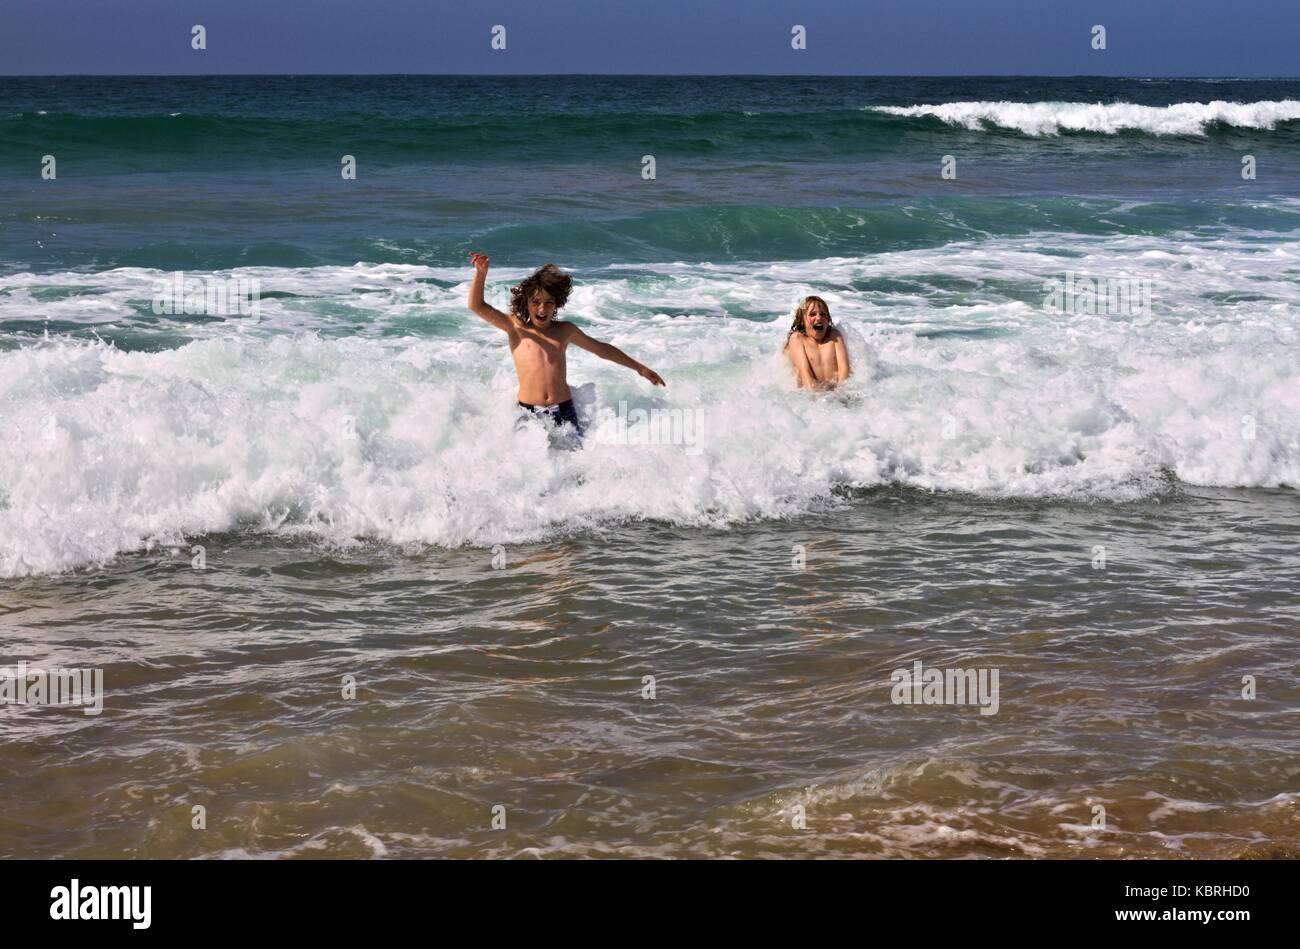 Two boys happily jumping in the cold waves of Marengo Beach in early spring, Australia. Stock Photo